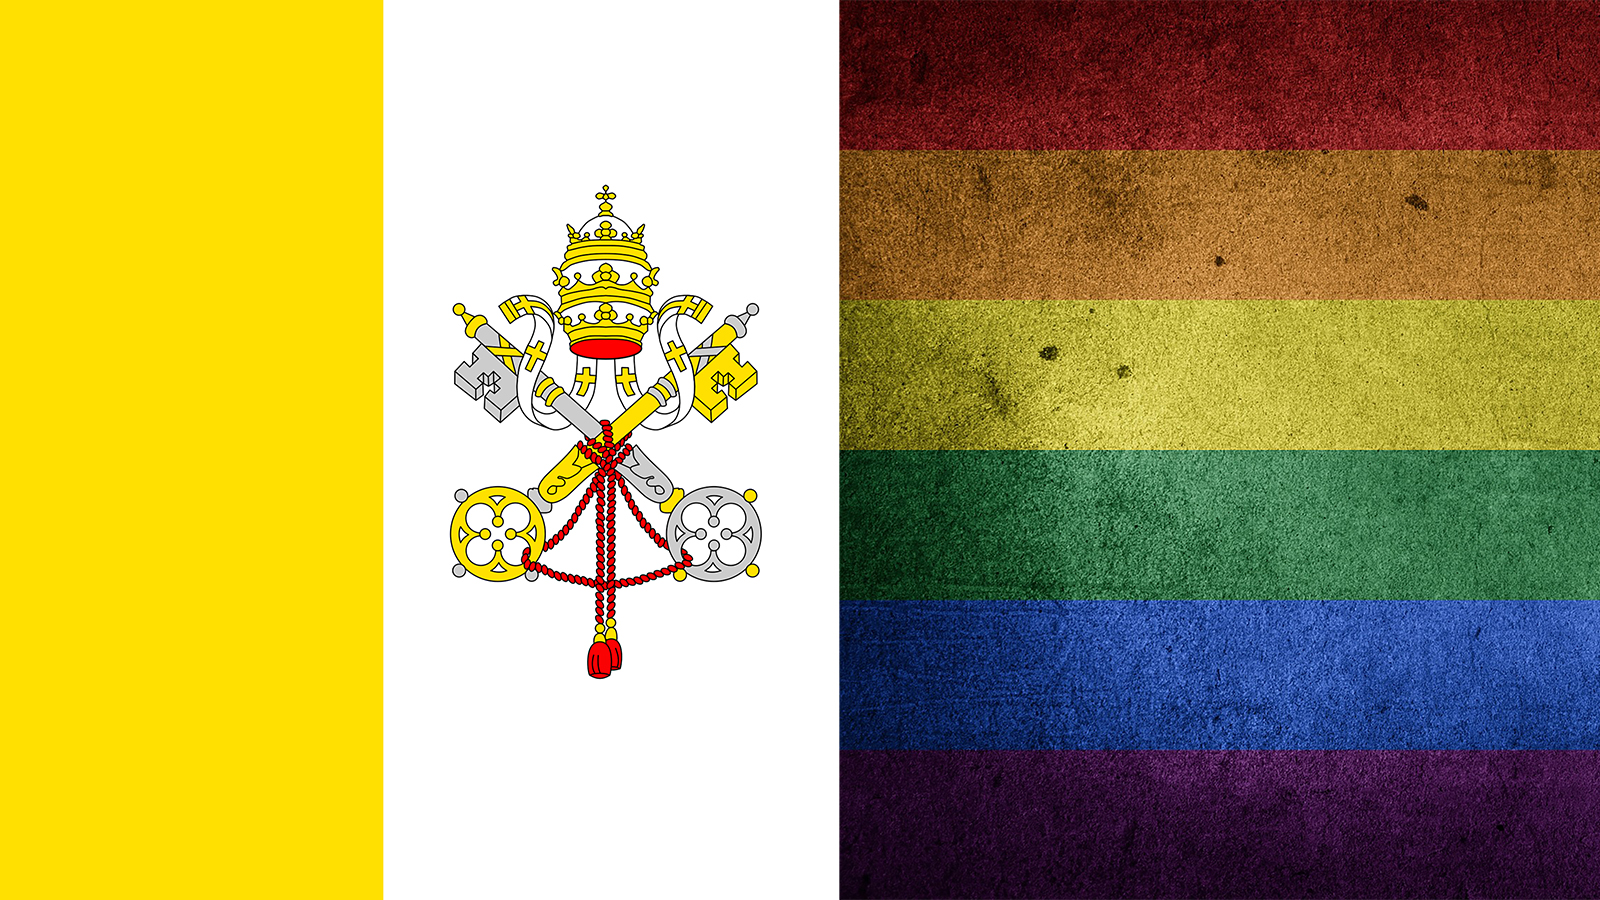 The Vatican City flag, left, and a pride flag. Images courtesy of Creative Commons